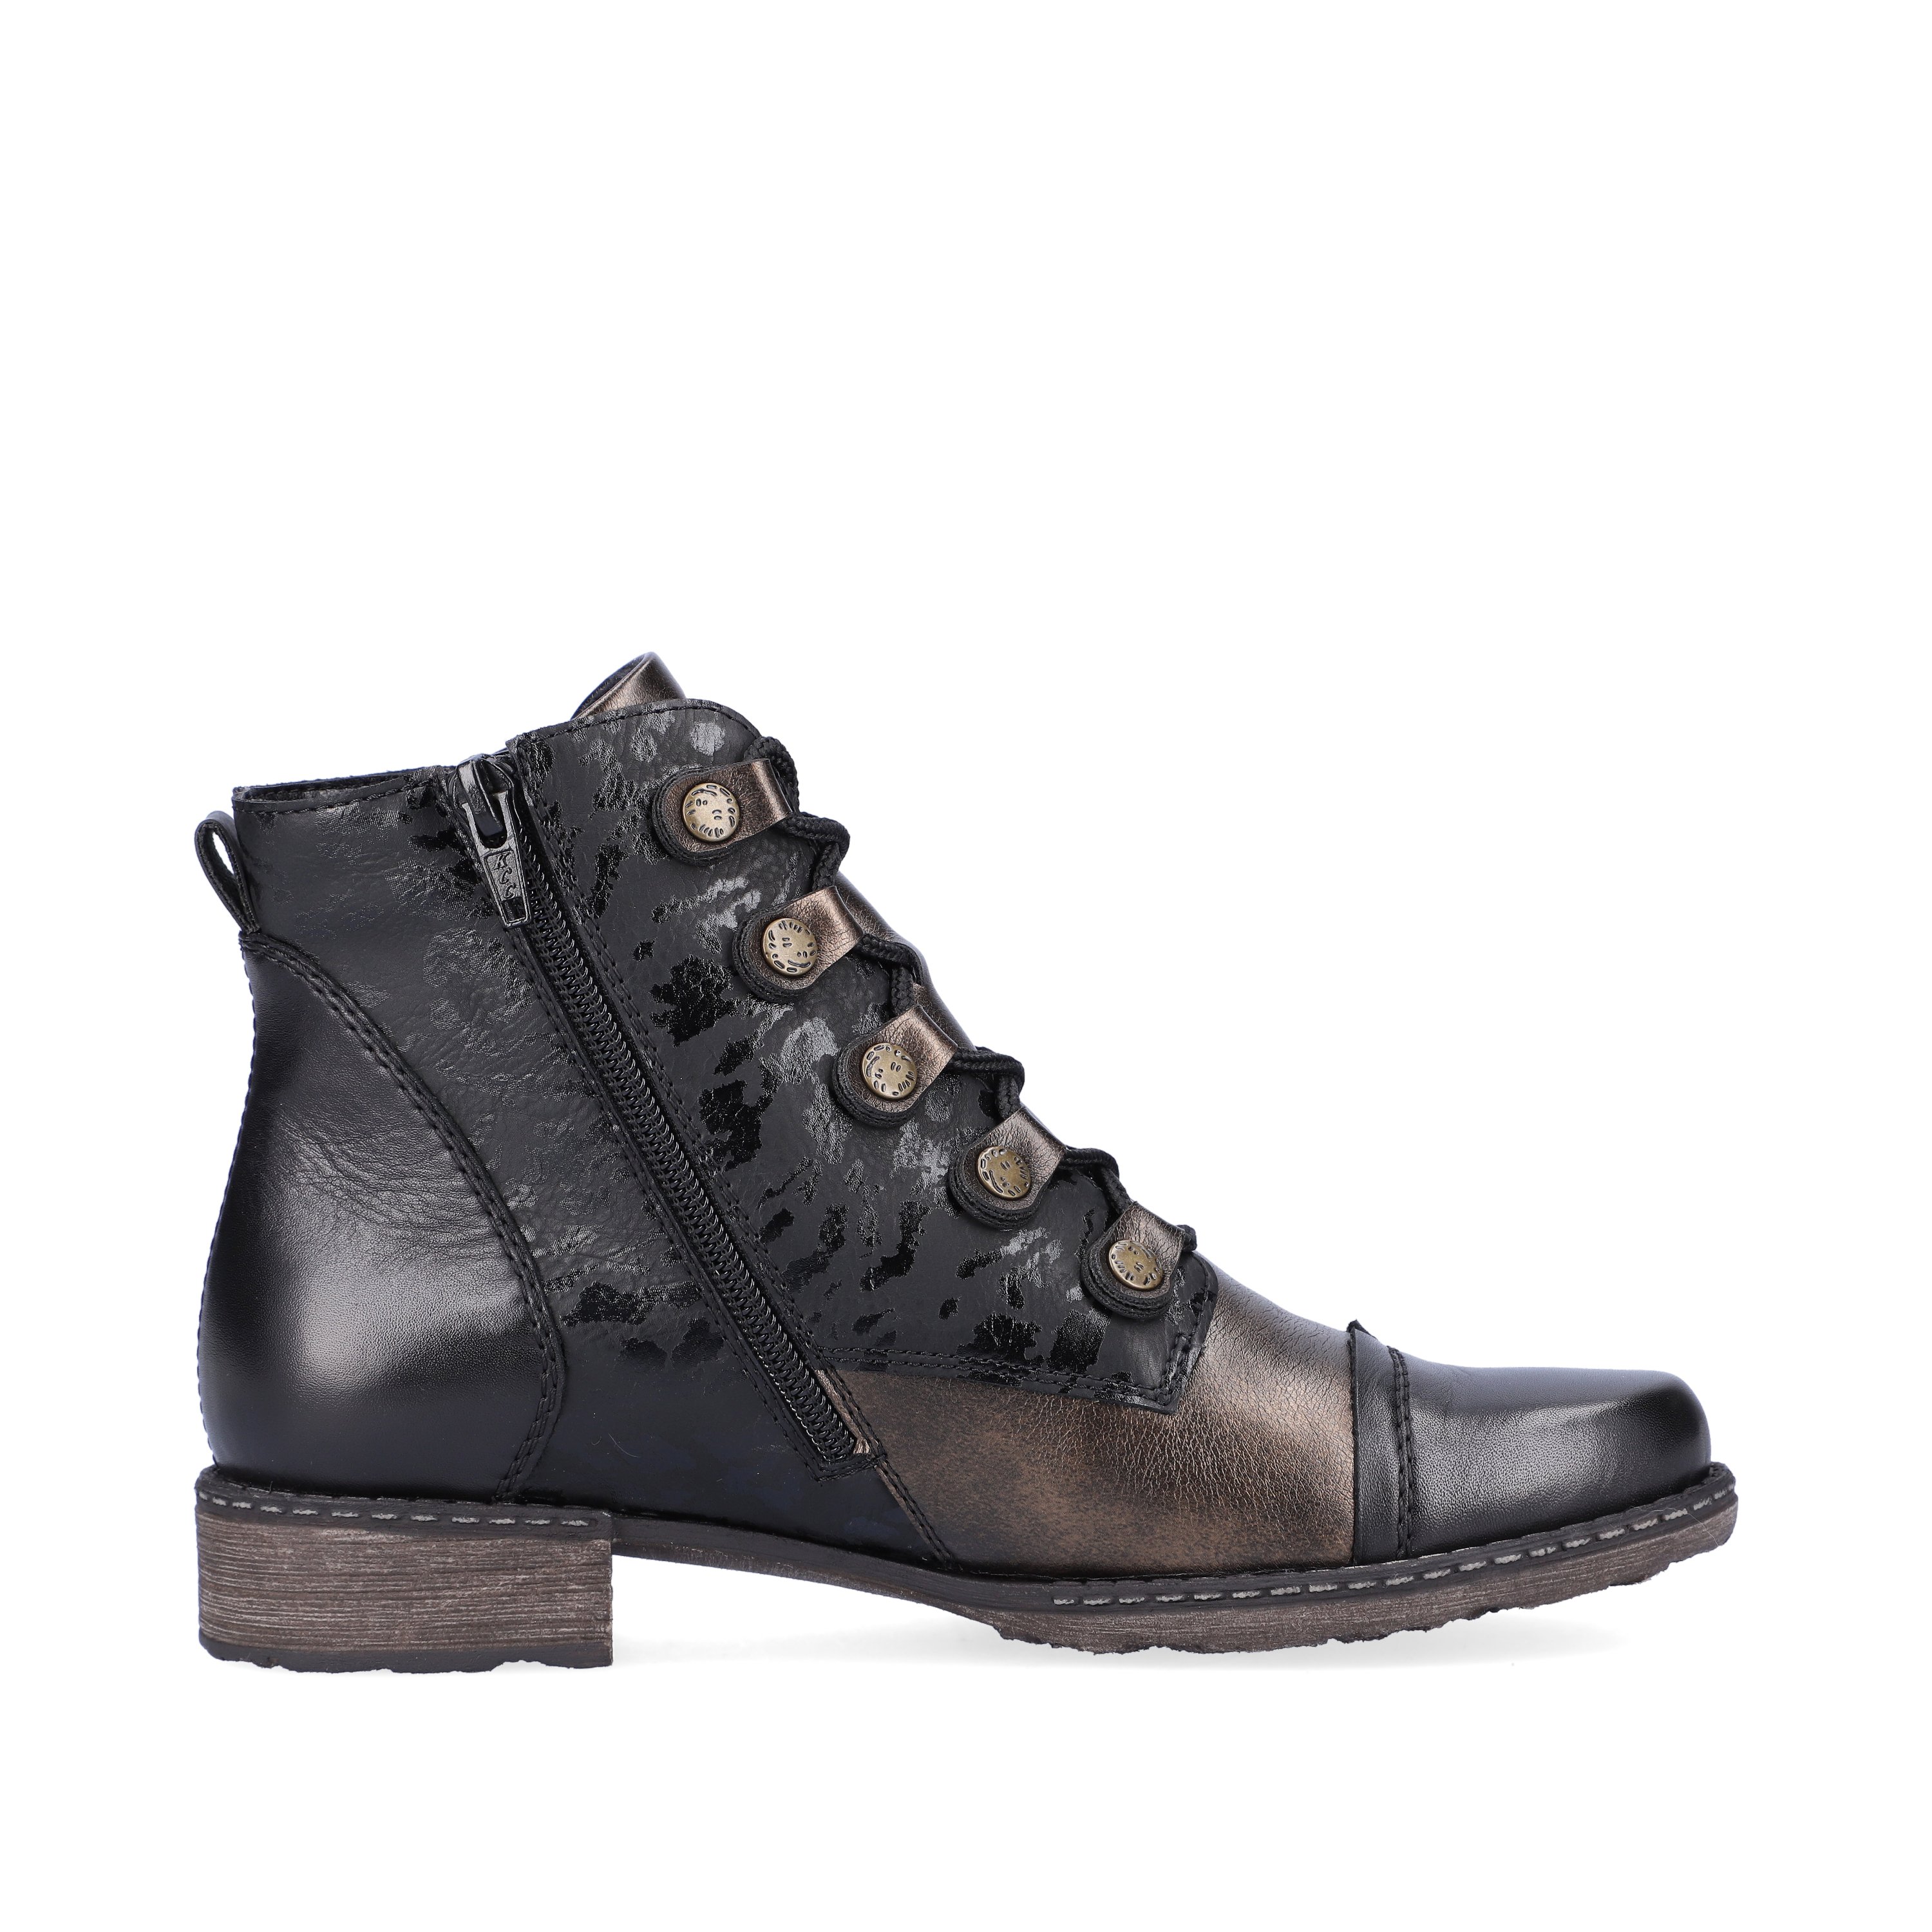 Black remonte women´s lace-up boots D4391-02 with hard-wearing profile sole. Shoe inside